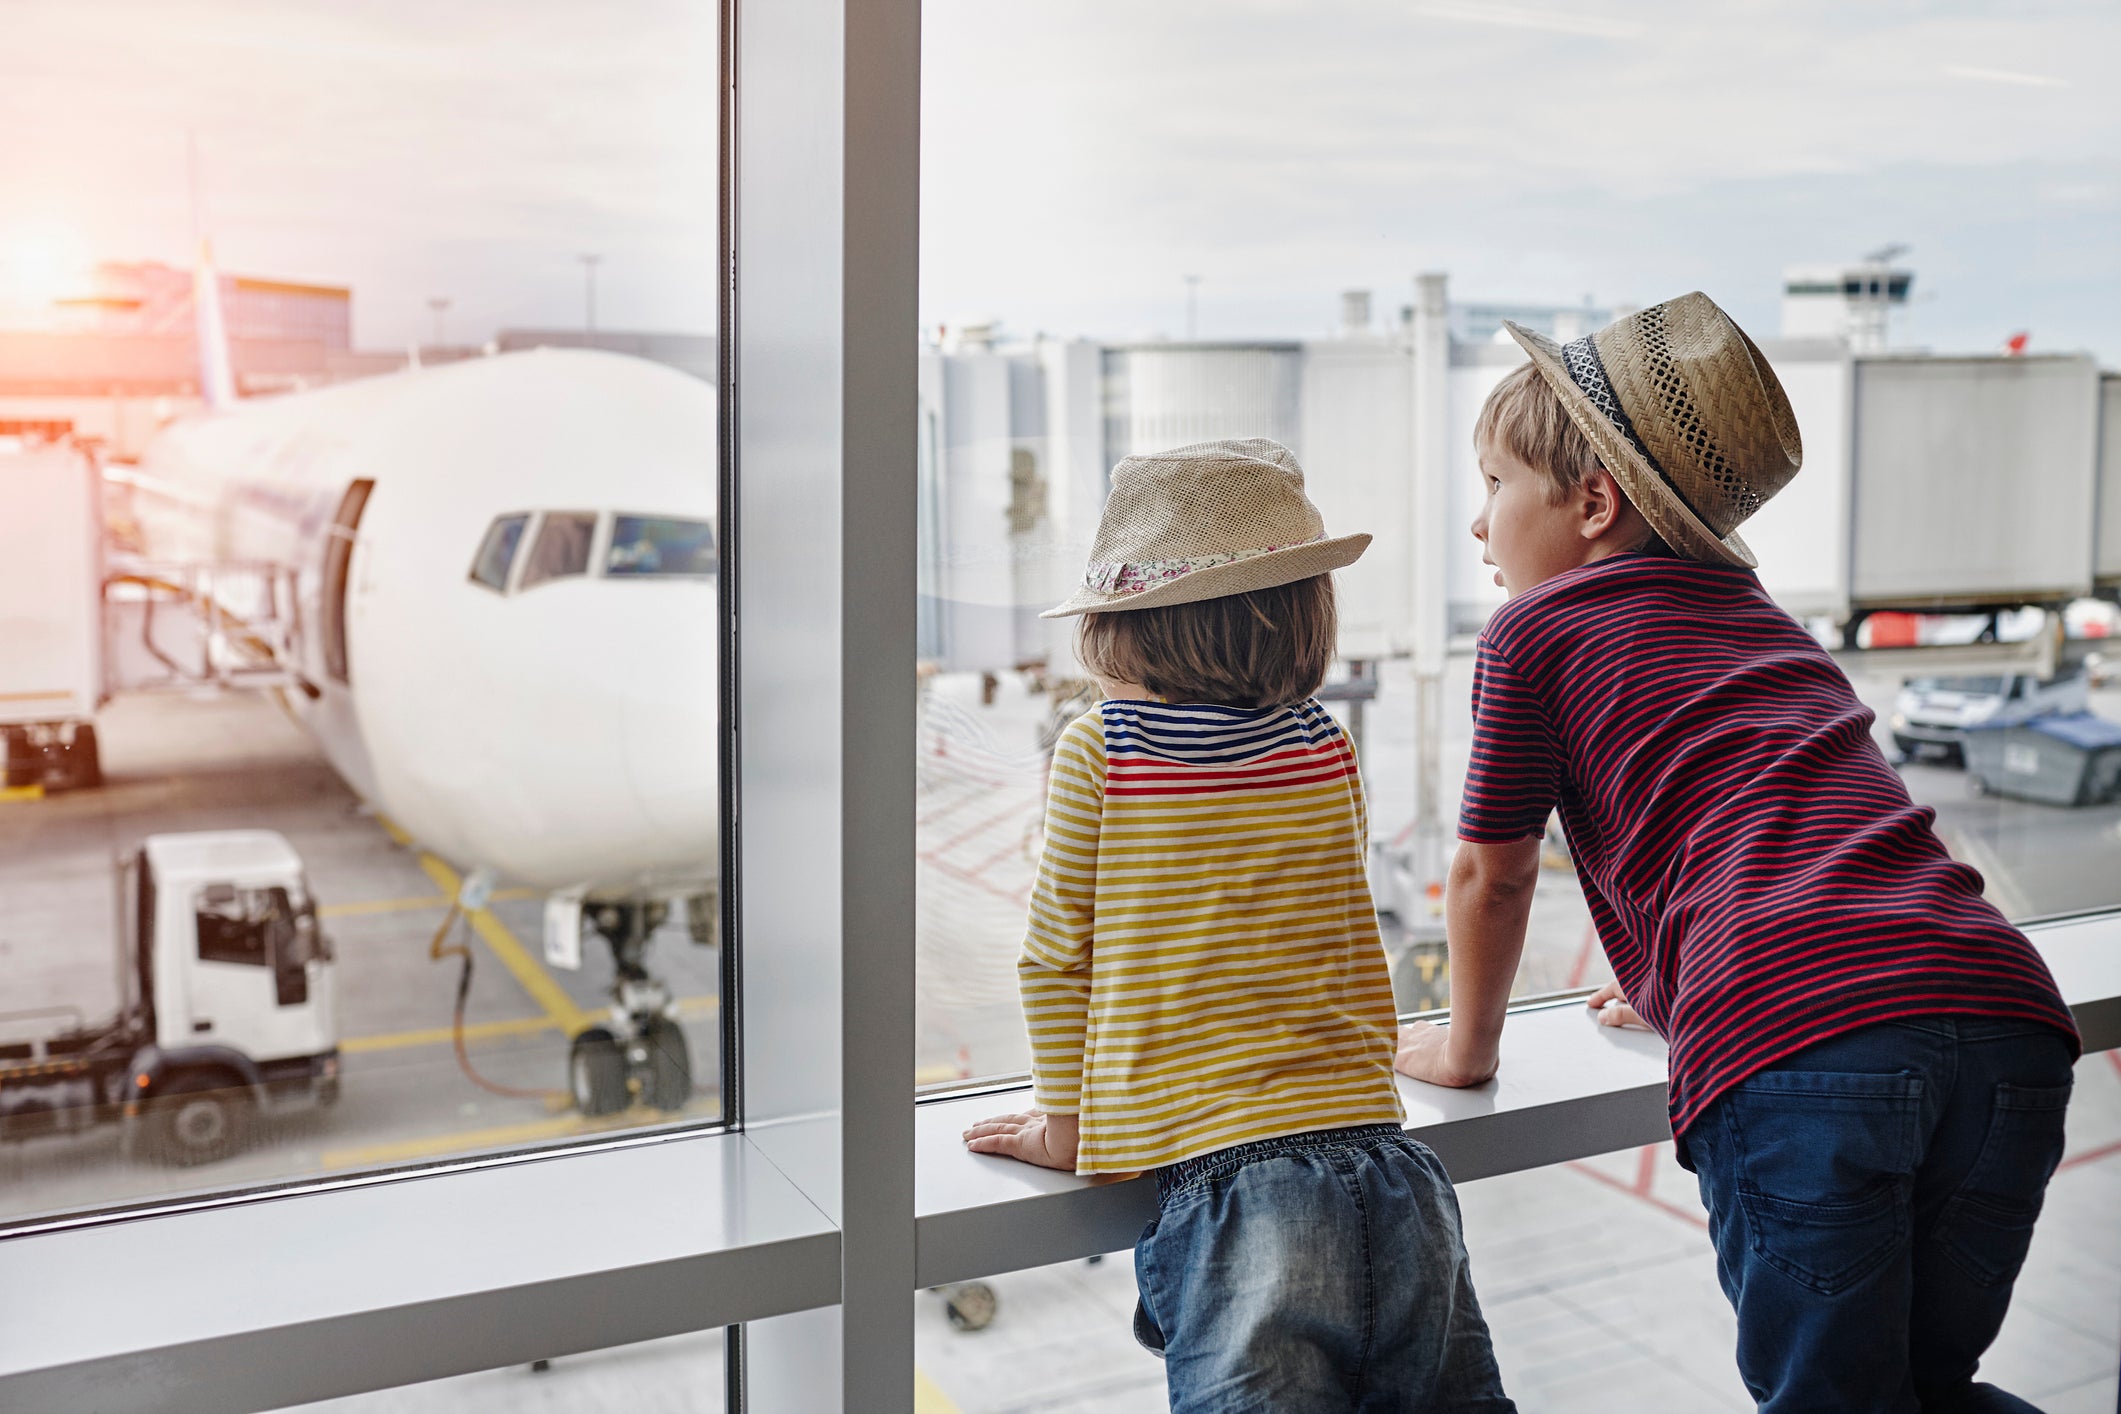 Two children wearing straw hats looking through window to airplane on the apron